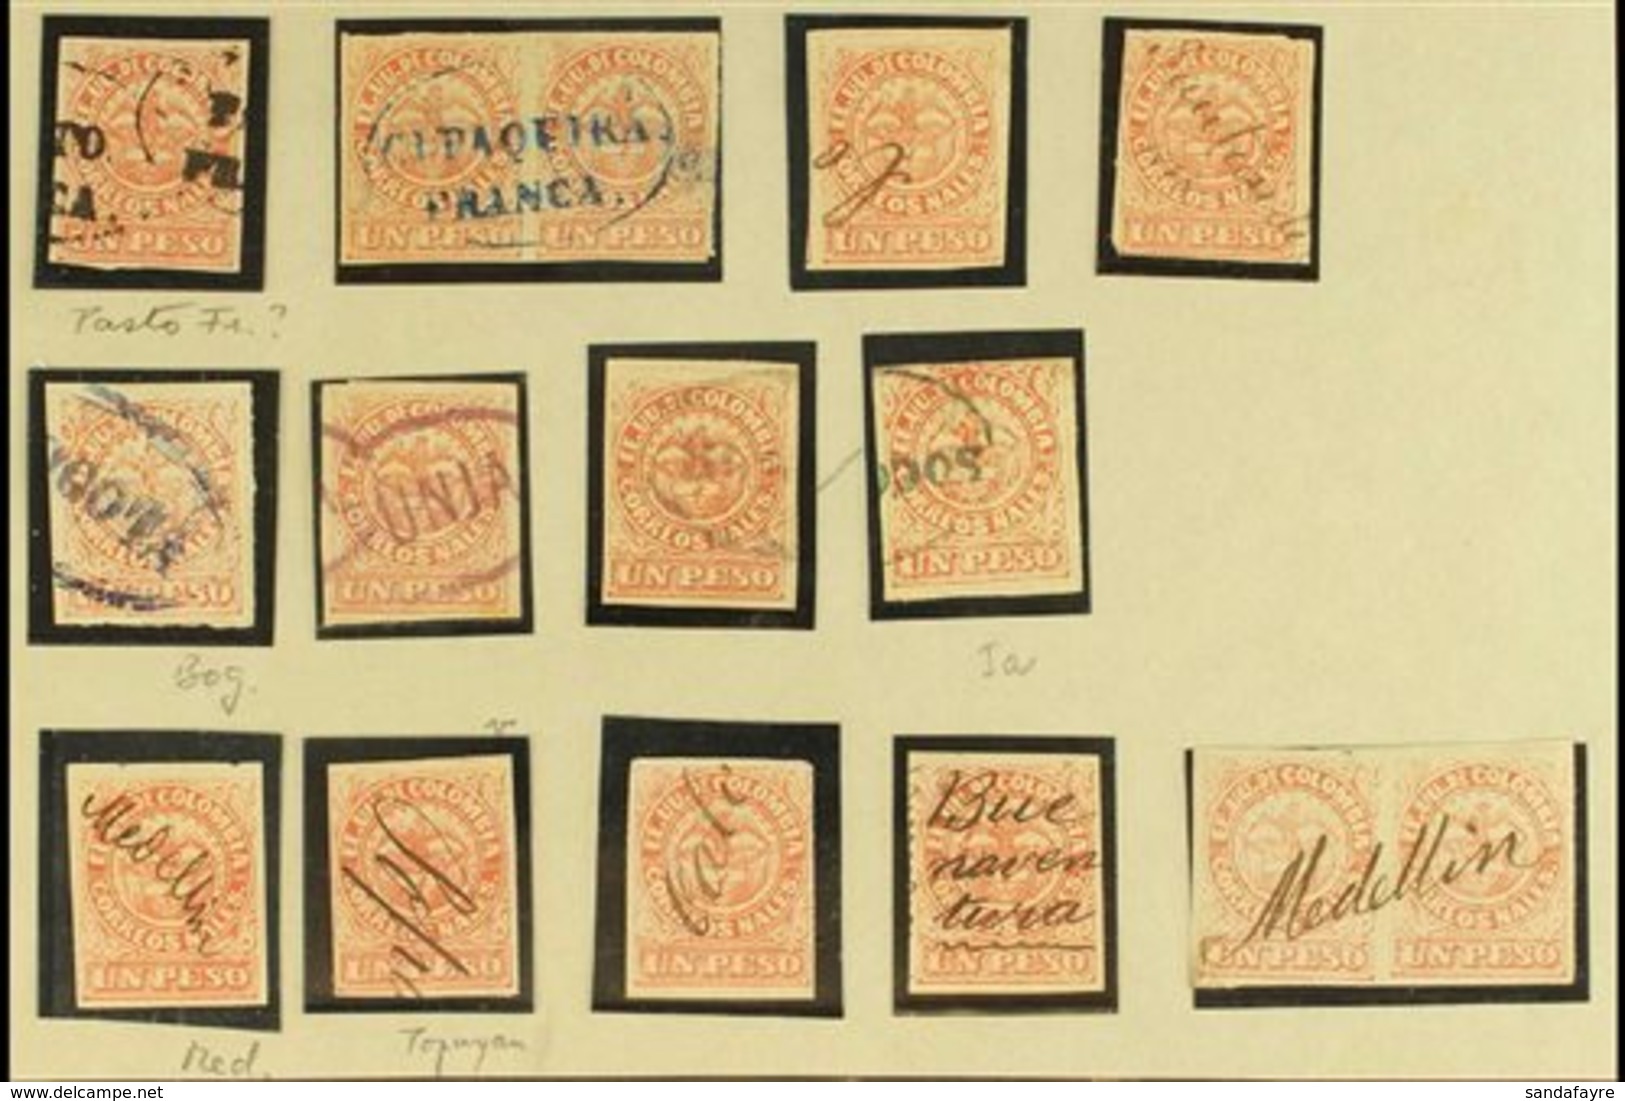 1868 1p Rose Red Type I (Scott 57b, SG 56) - Fifteen Used Examples Incl Two Pairs Wit Postmark Interest Such As Oval "Pa - Colombia